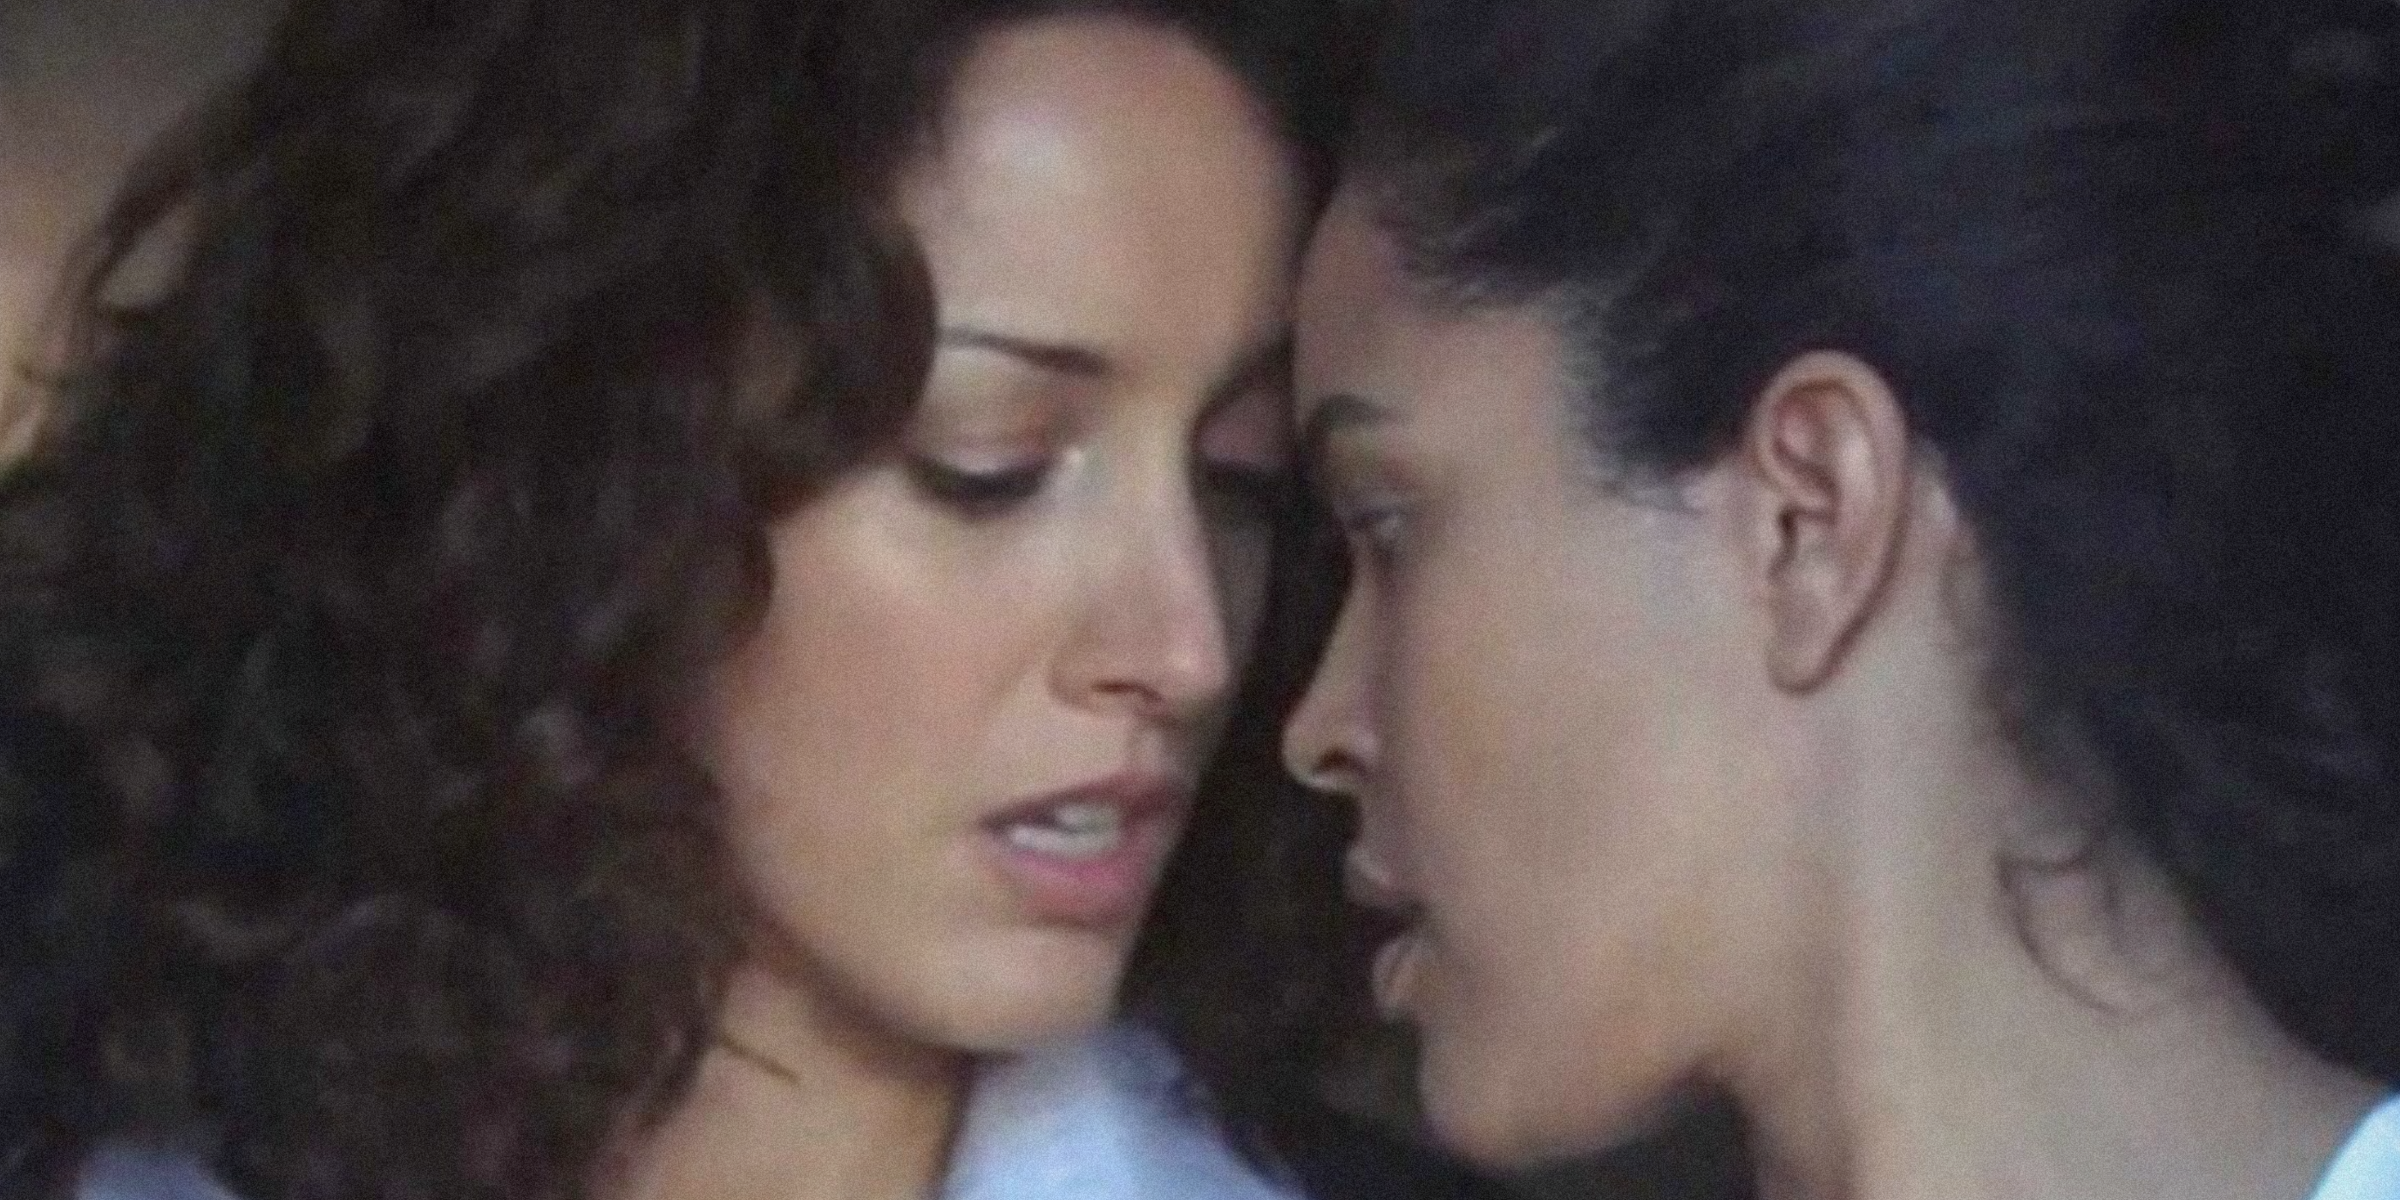 Cheating Is Not Abuse: Bette and Candace almost kiss in close up from season one of The L Word